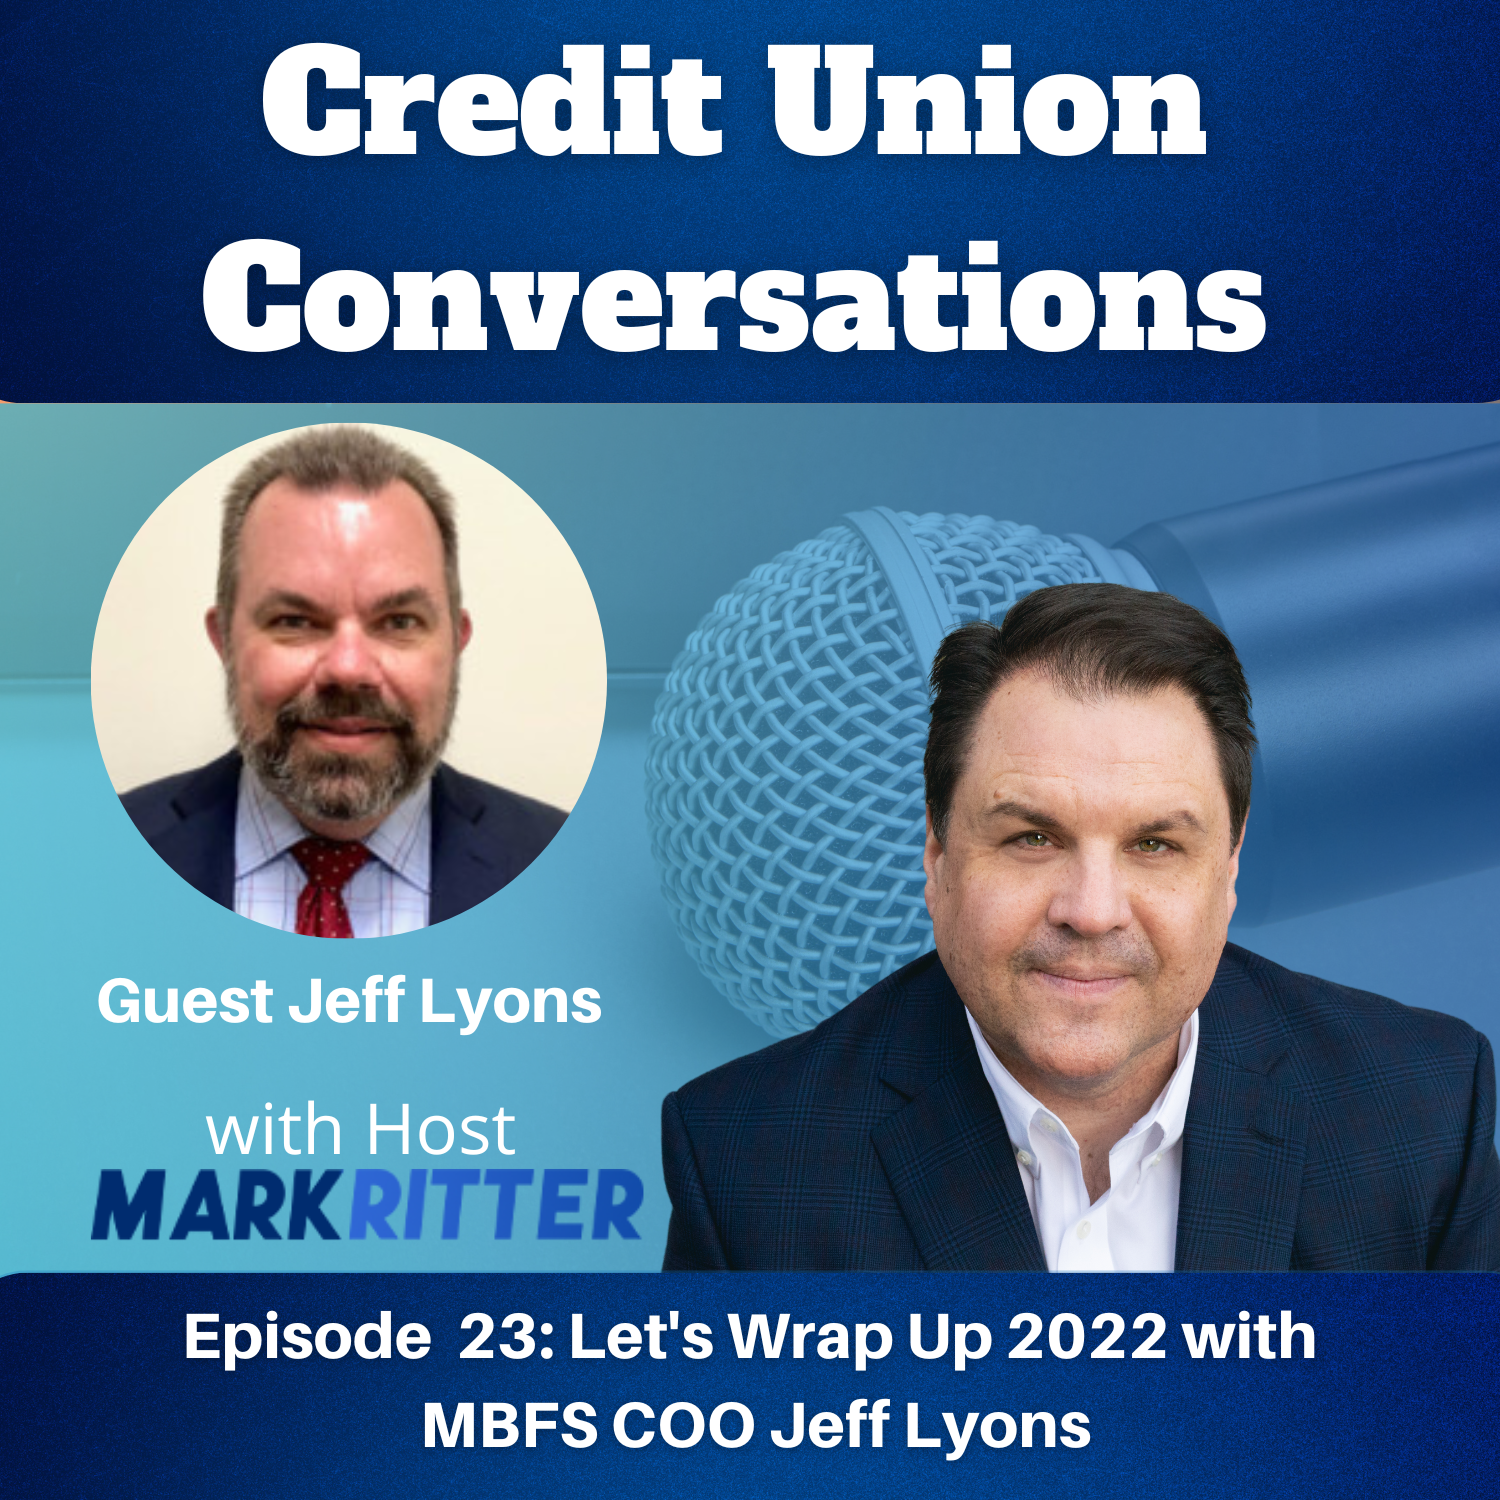 Let’s Wrap Up 2022 with MBFS COO Jeff Lyons